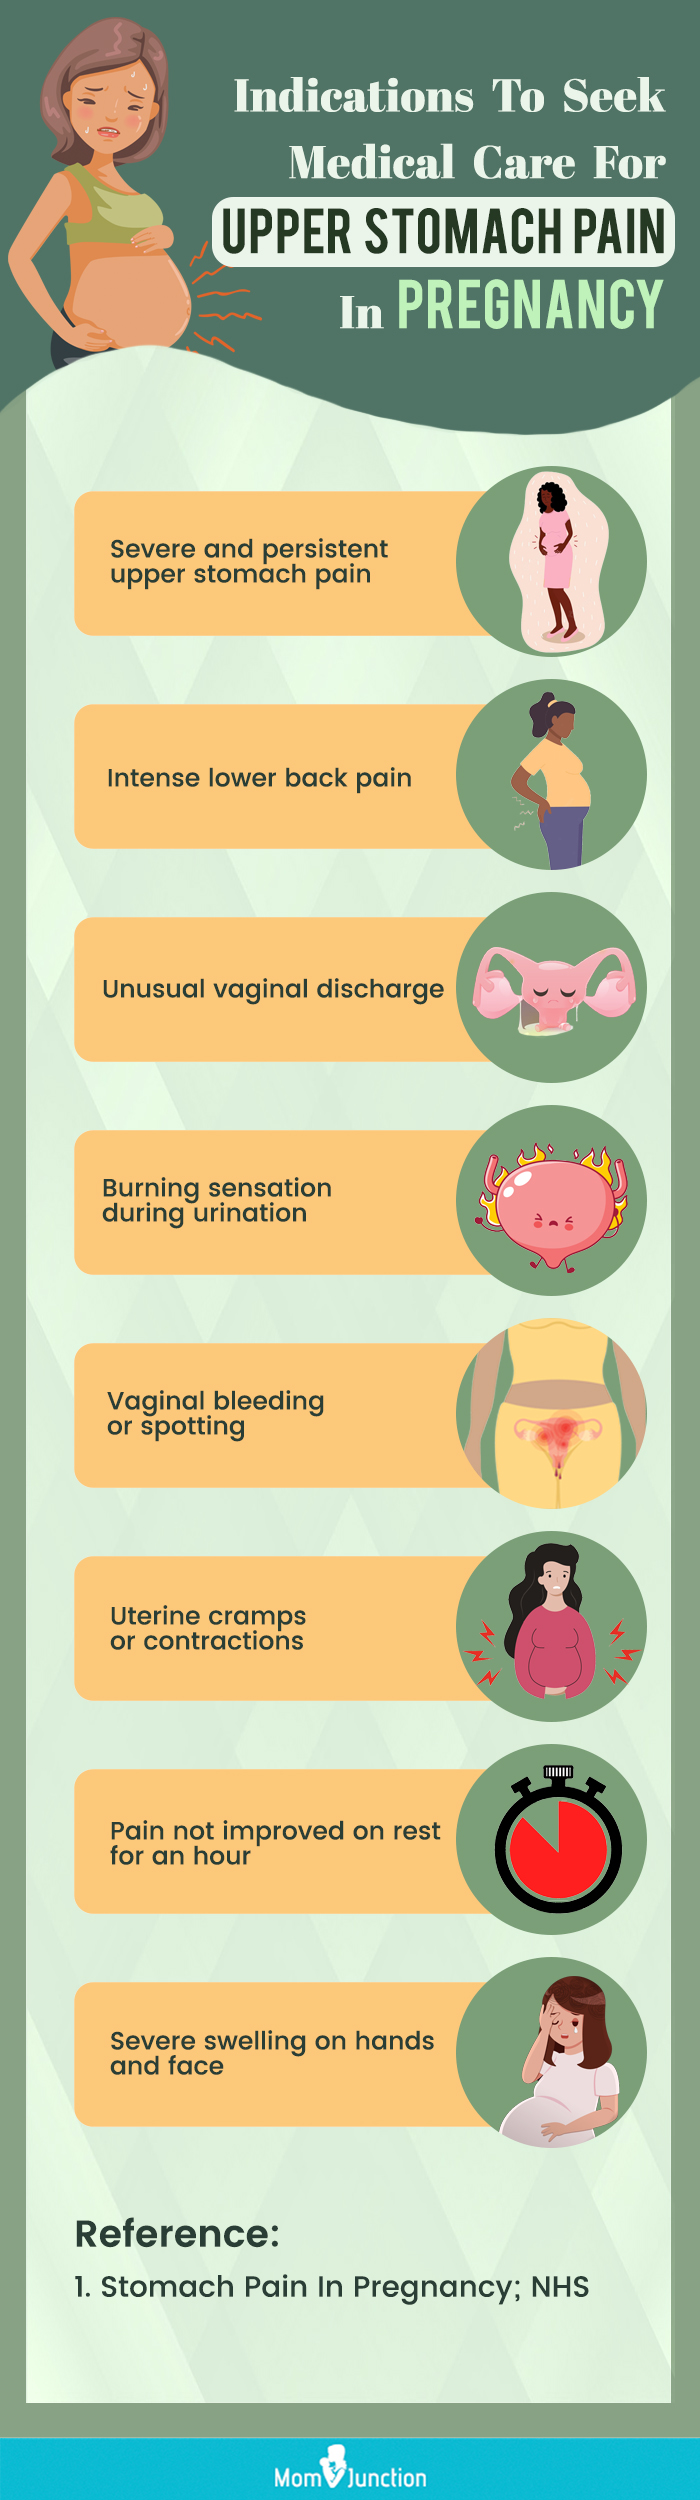 indications to seek medical care for upper stomach pain in pregnancy (infographic)